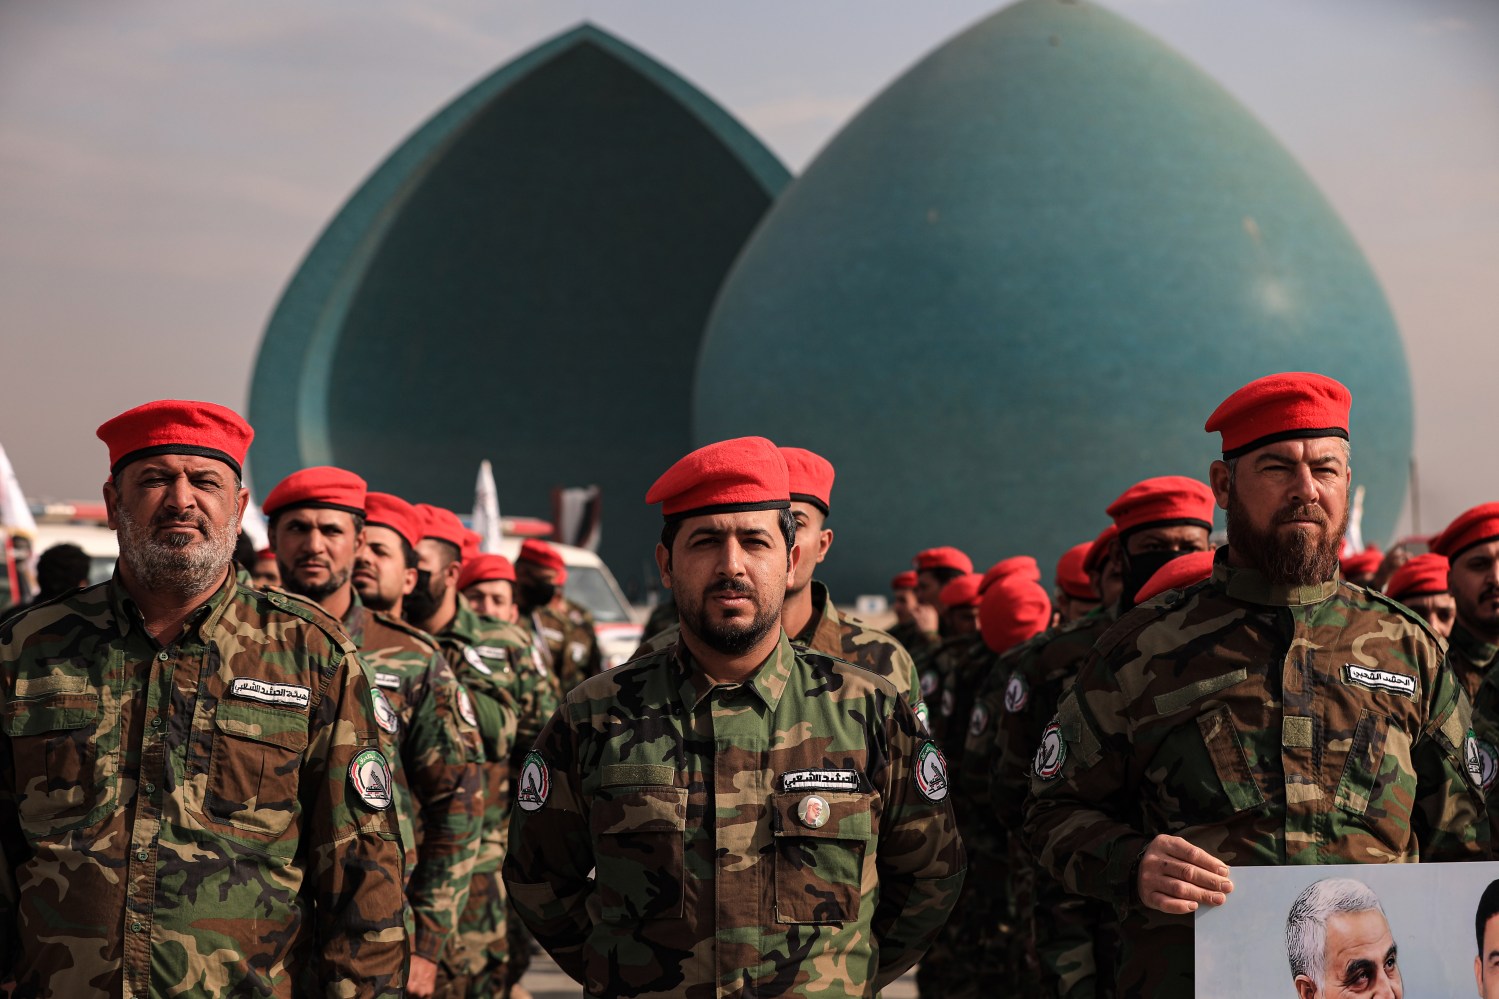 Members of the Iraqi predominantly Shia Muslim Popular Mobilization Forces (PMF) parade symbolic coffins at Baghdad's Tahrir Square during a rally organized to mark the second anniversary of the United States airstrikes that targeted weapons depots and command centres of the Iran-backed Hezbollah Brigades. The targeted paramilitary group, which constitutes part of the PMF, suffered dozens of casualties in the attacks that took place in Al-Qa'im, an Iraqi town located near the Syrian border. 12/29/2021, Ameer Al Mohammedaw/dpa